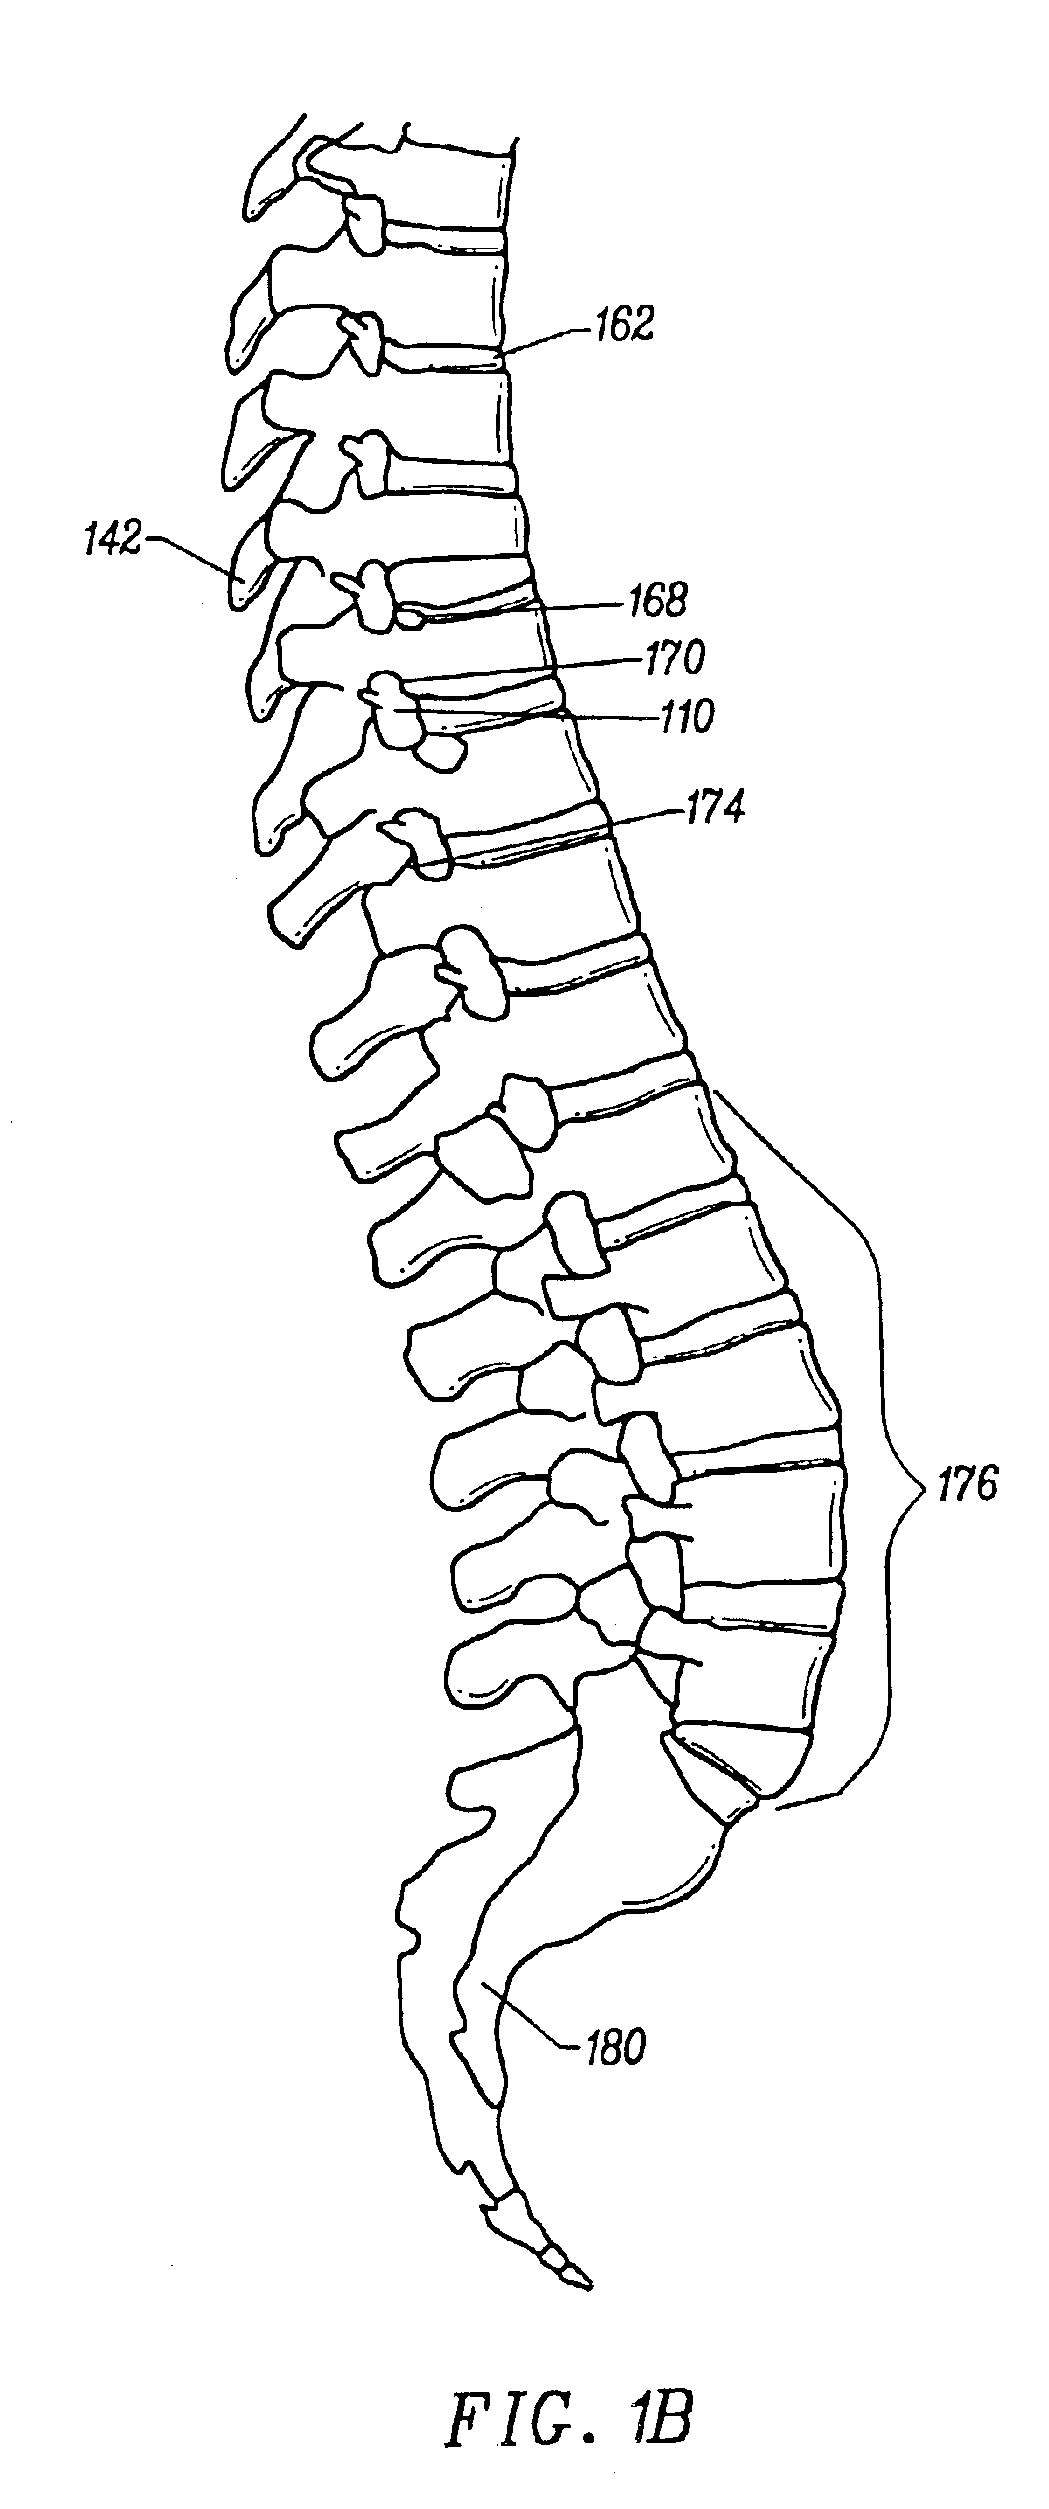 Method and apparatus for treating annular fissures in intervertebral discs